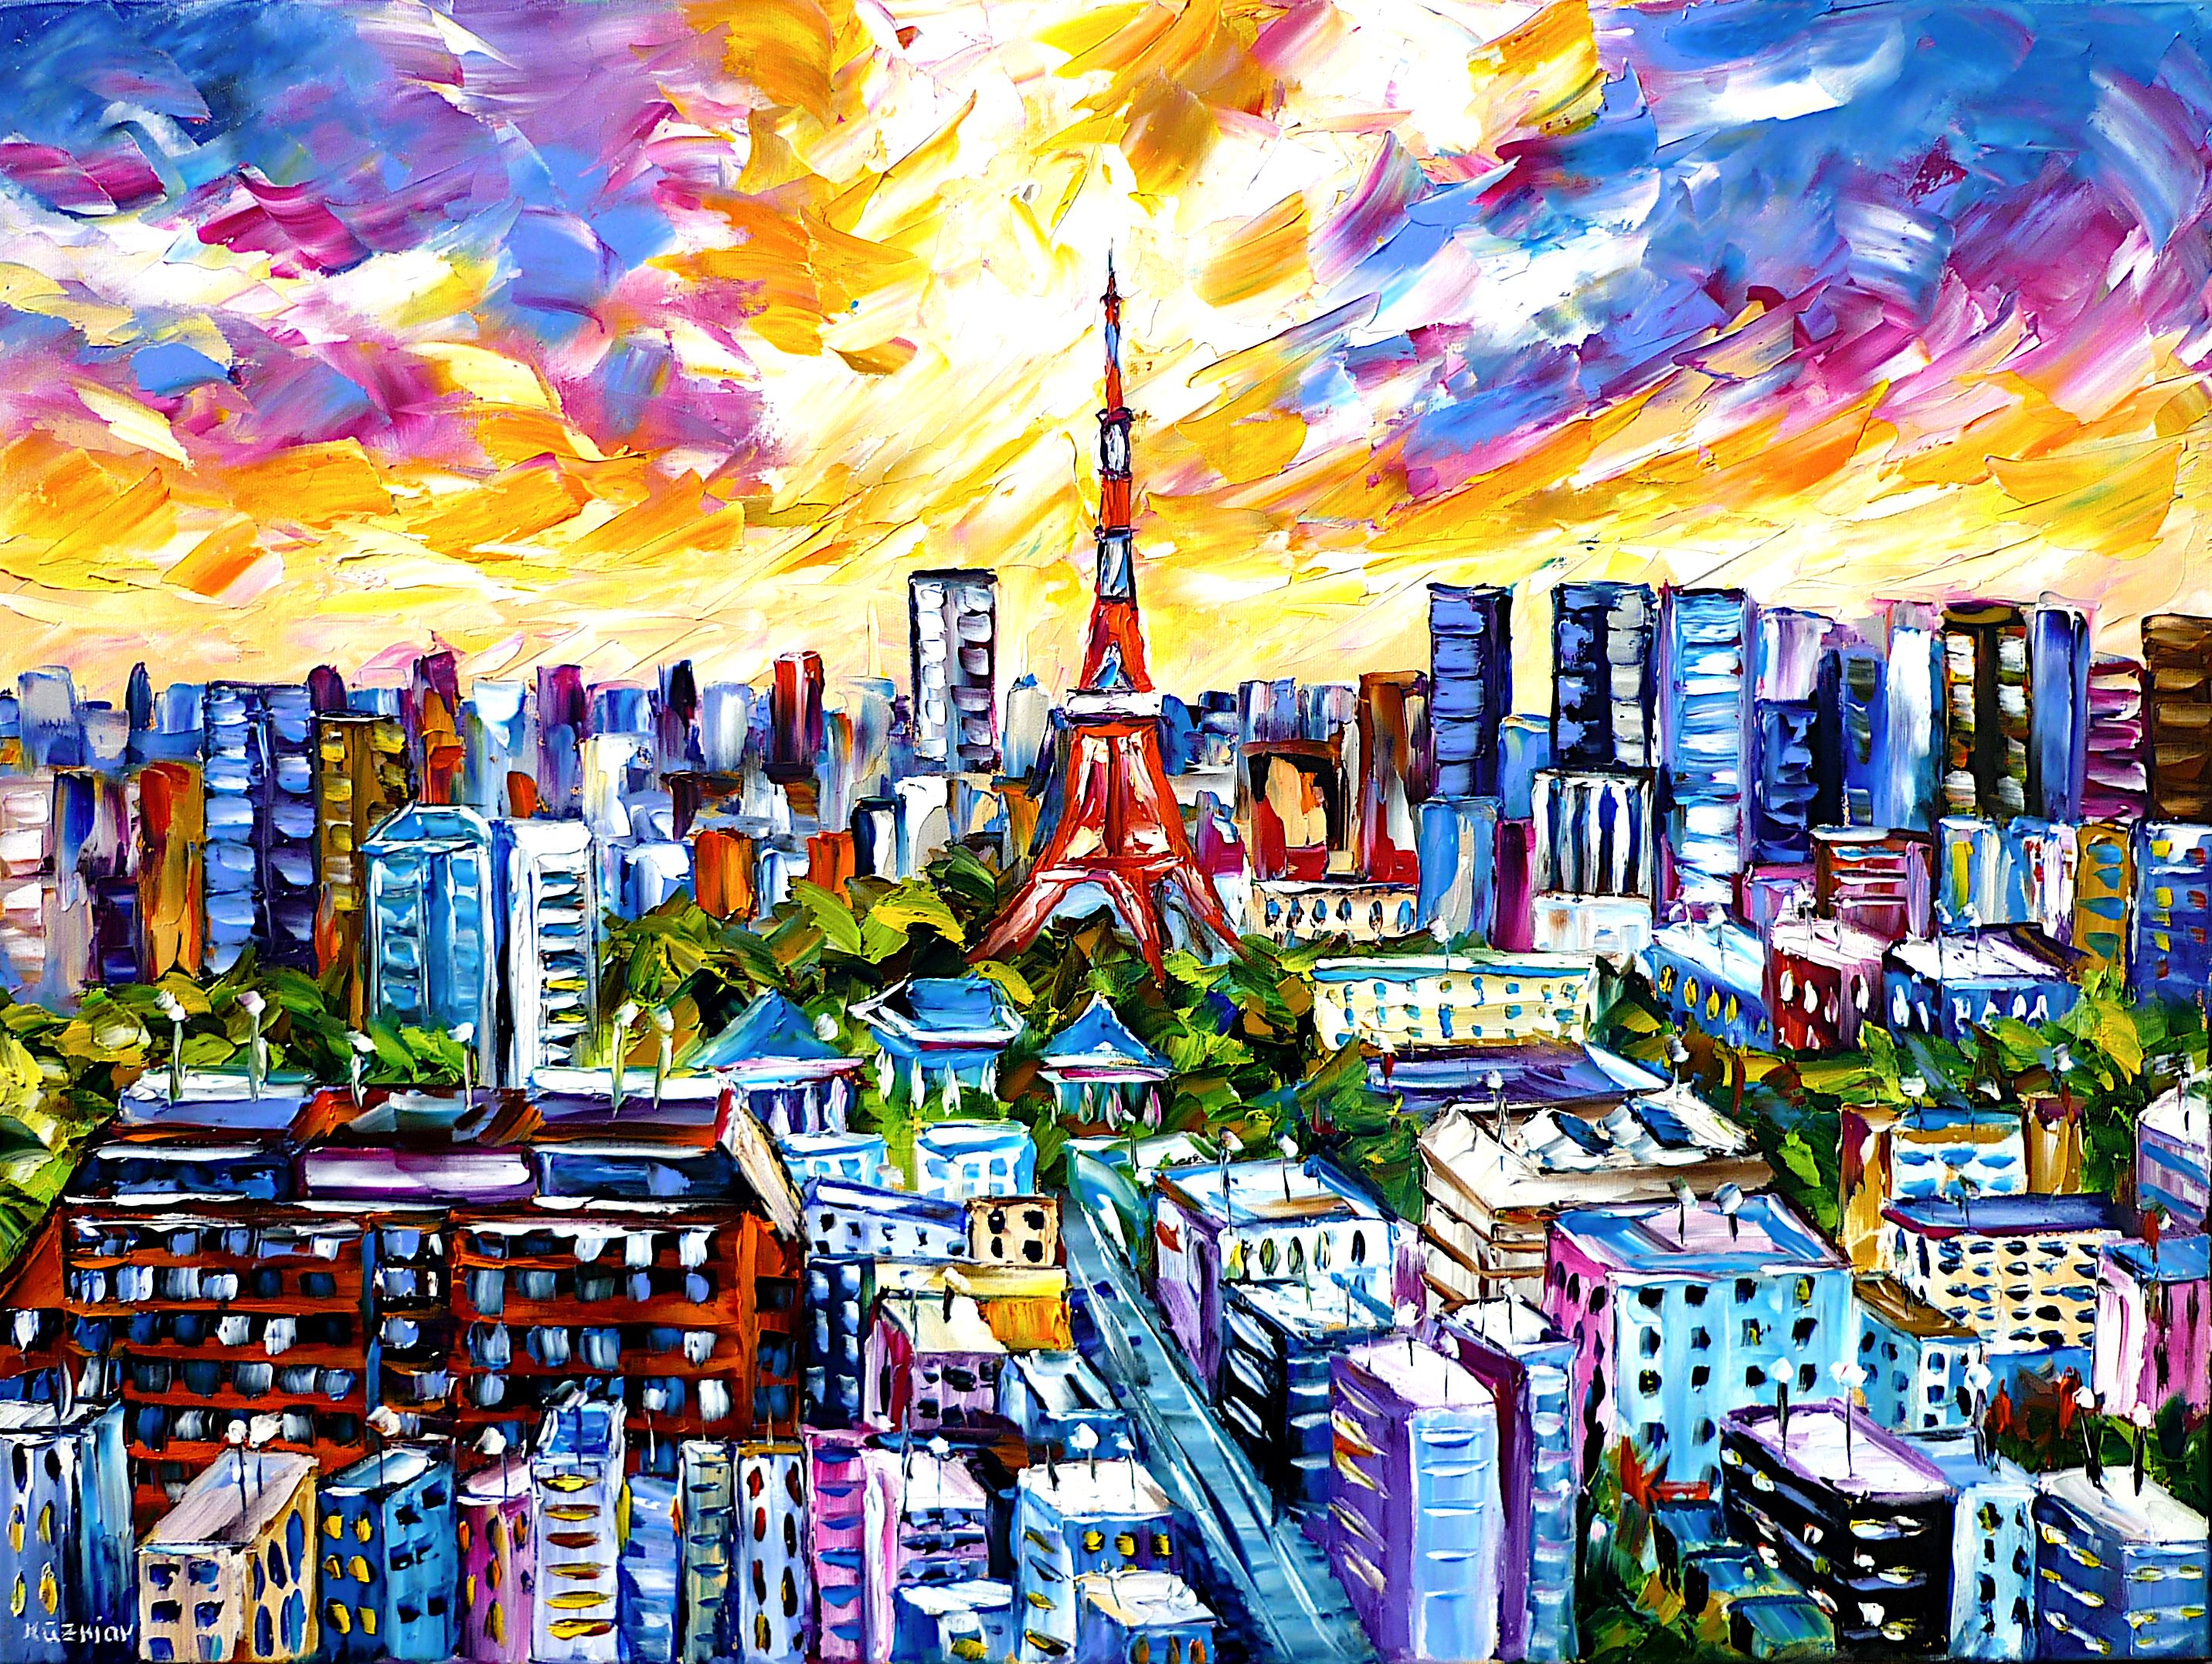 tokyo skyline,tokyo from above,tokyo tower,tokyo cityscape,houses of tokyo,tokyo skyscrapers,tokyo colorful,tokyo abstract,tokyo city,abstract sky,tokyo painting,tokyo picture,tokyo tv tower,tokyo love,tokyo lovers,i love tokyo,japan,sky over the city,palette knife oil painting,modern art,modern painting,impressionism,expressionism,abstract painting,lively colors,colorful painting,bright colors,light reflections,impasto painting,figurative